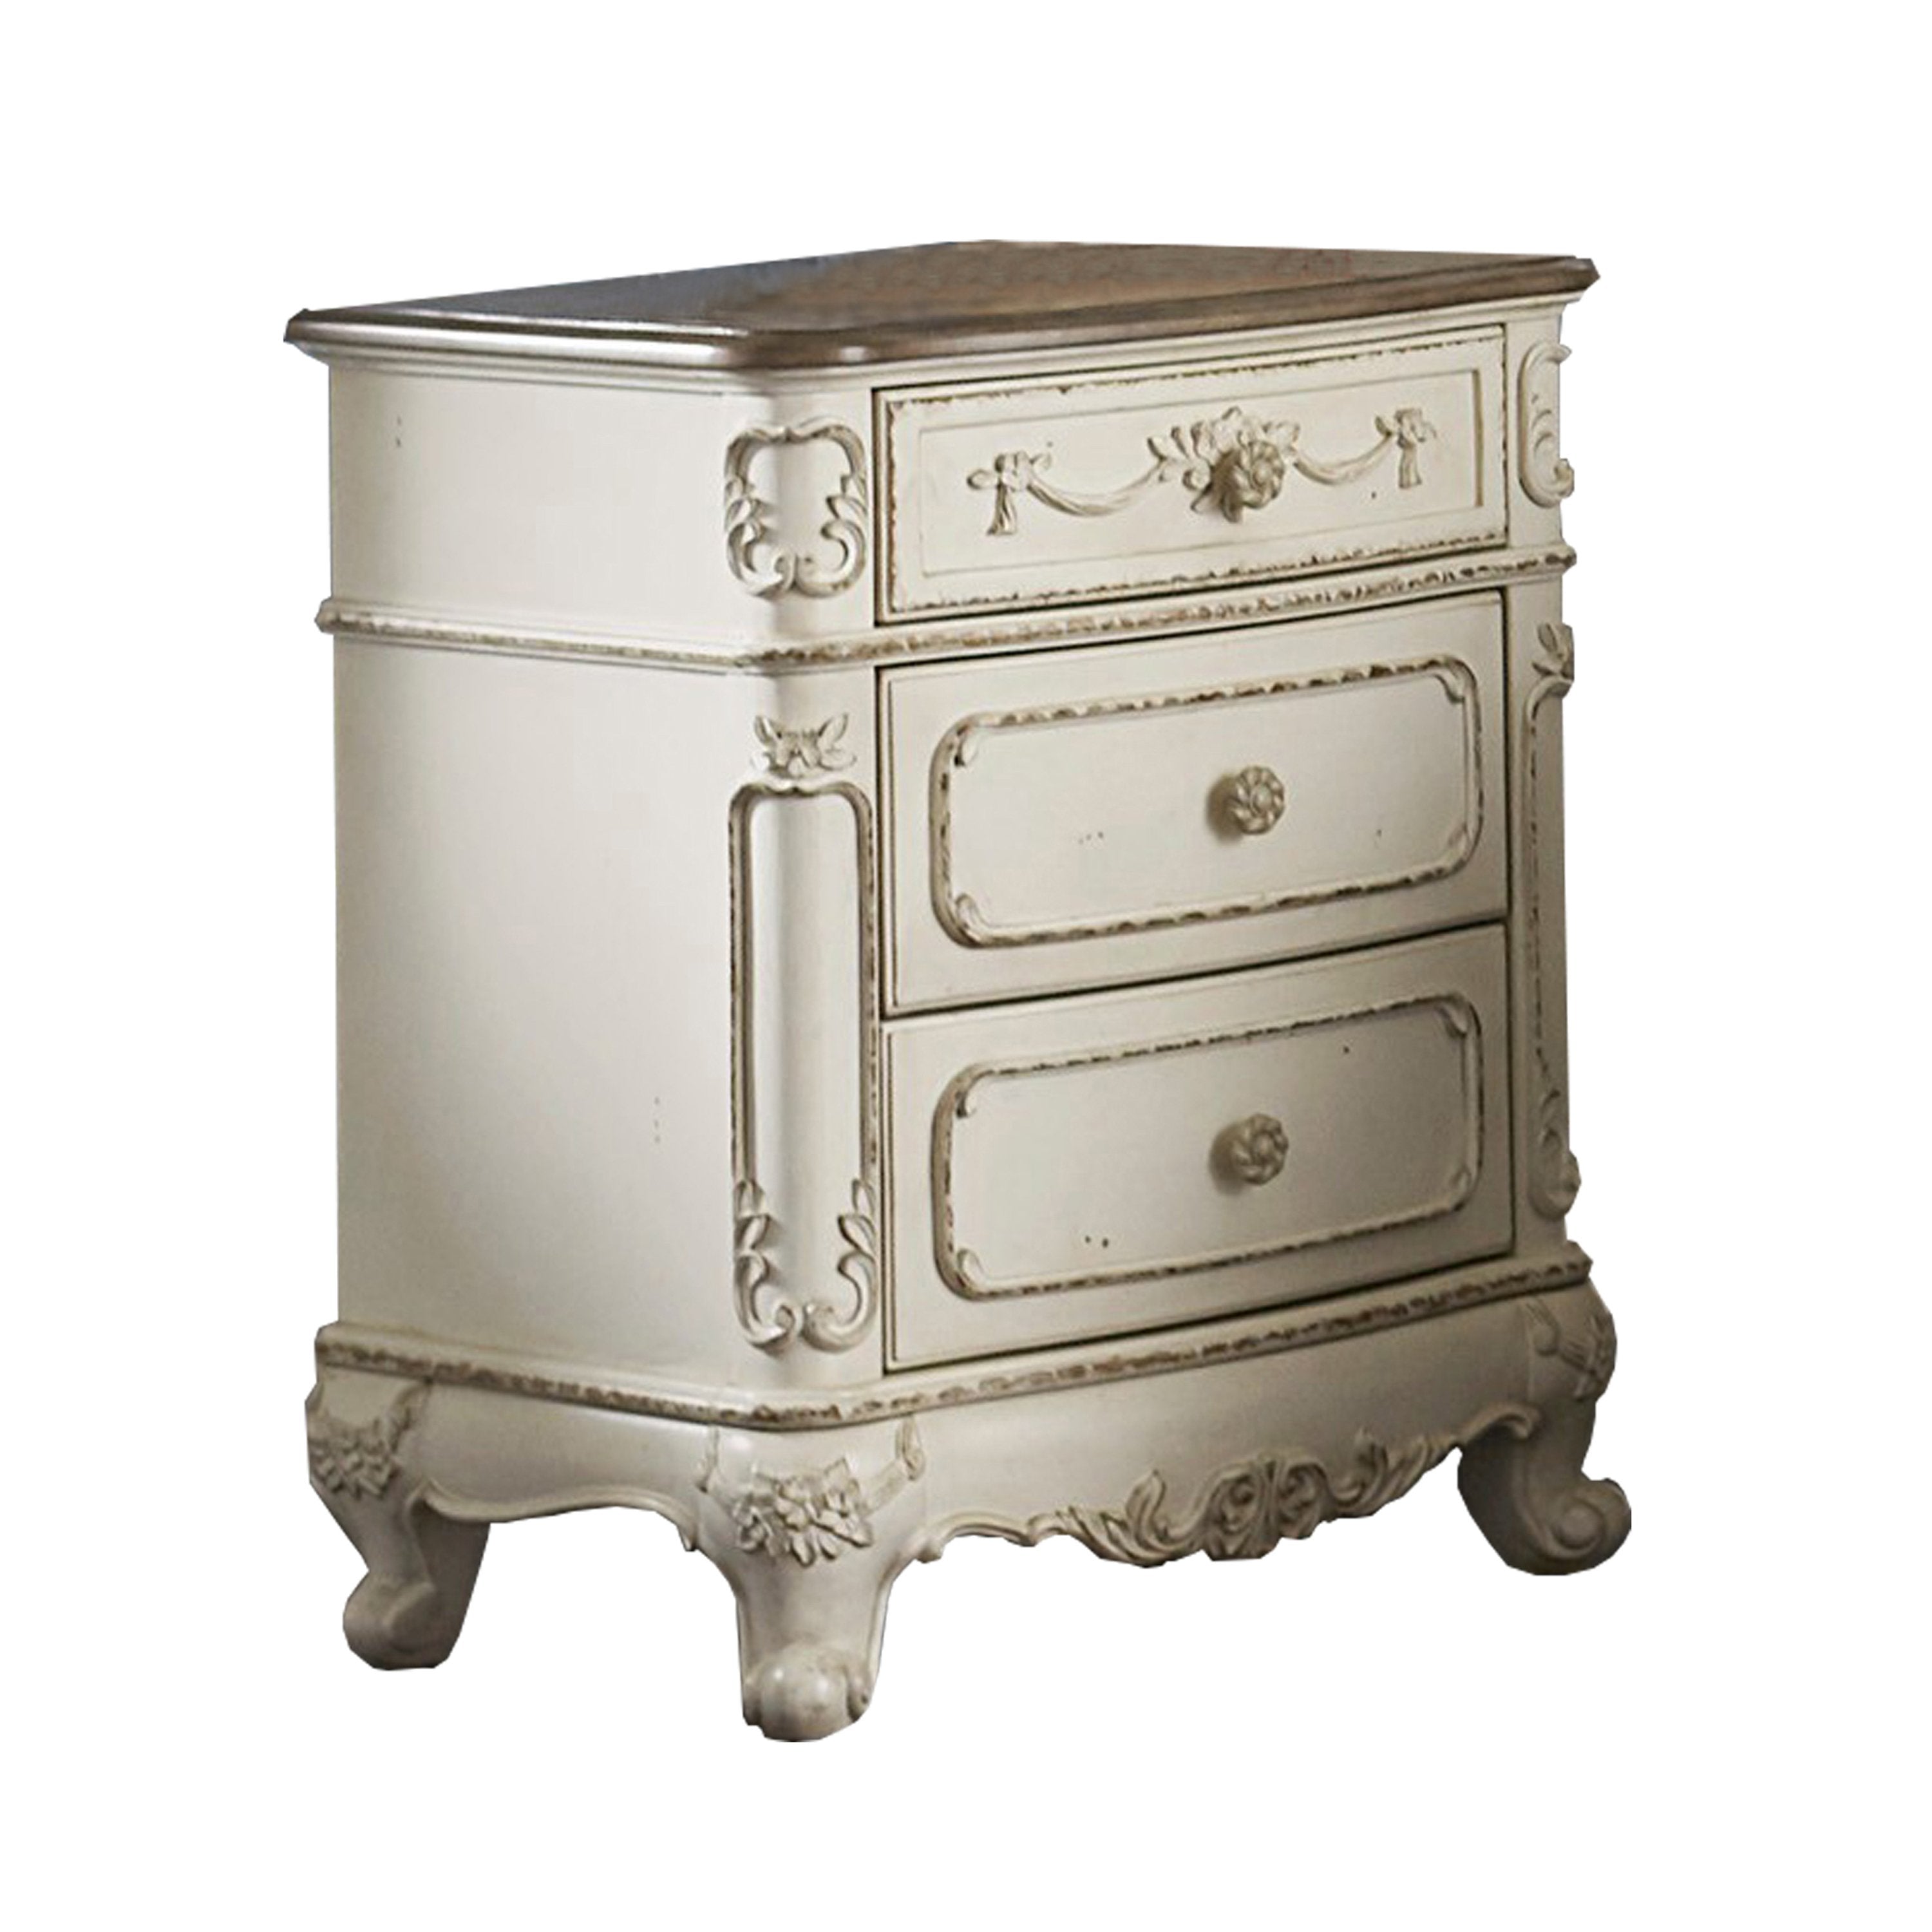 Benzara BM219789 3 Drawer Nightstand with Floral Motif Carving Details